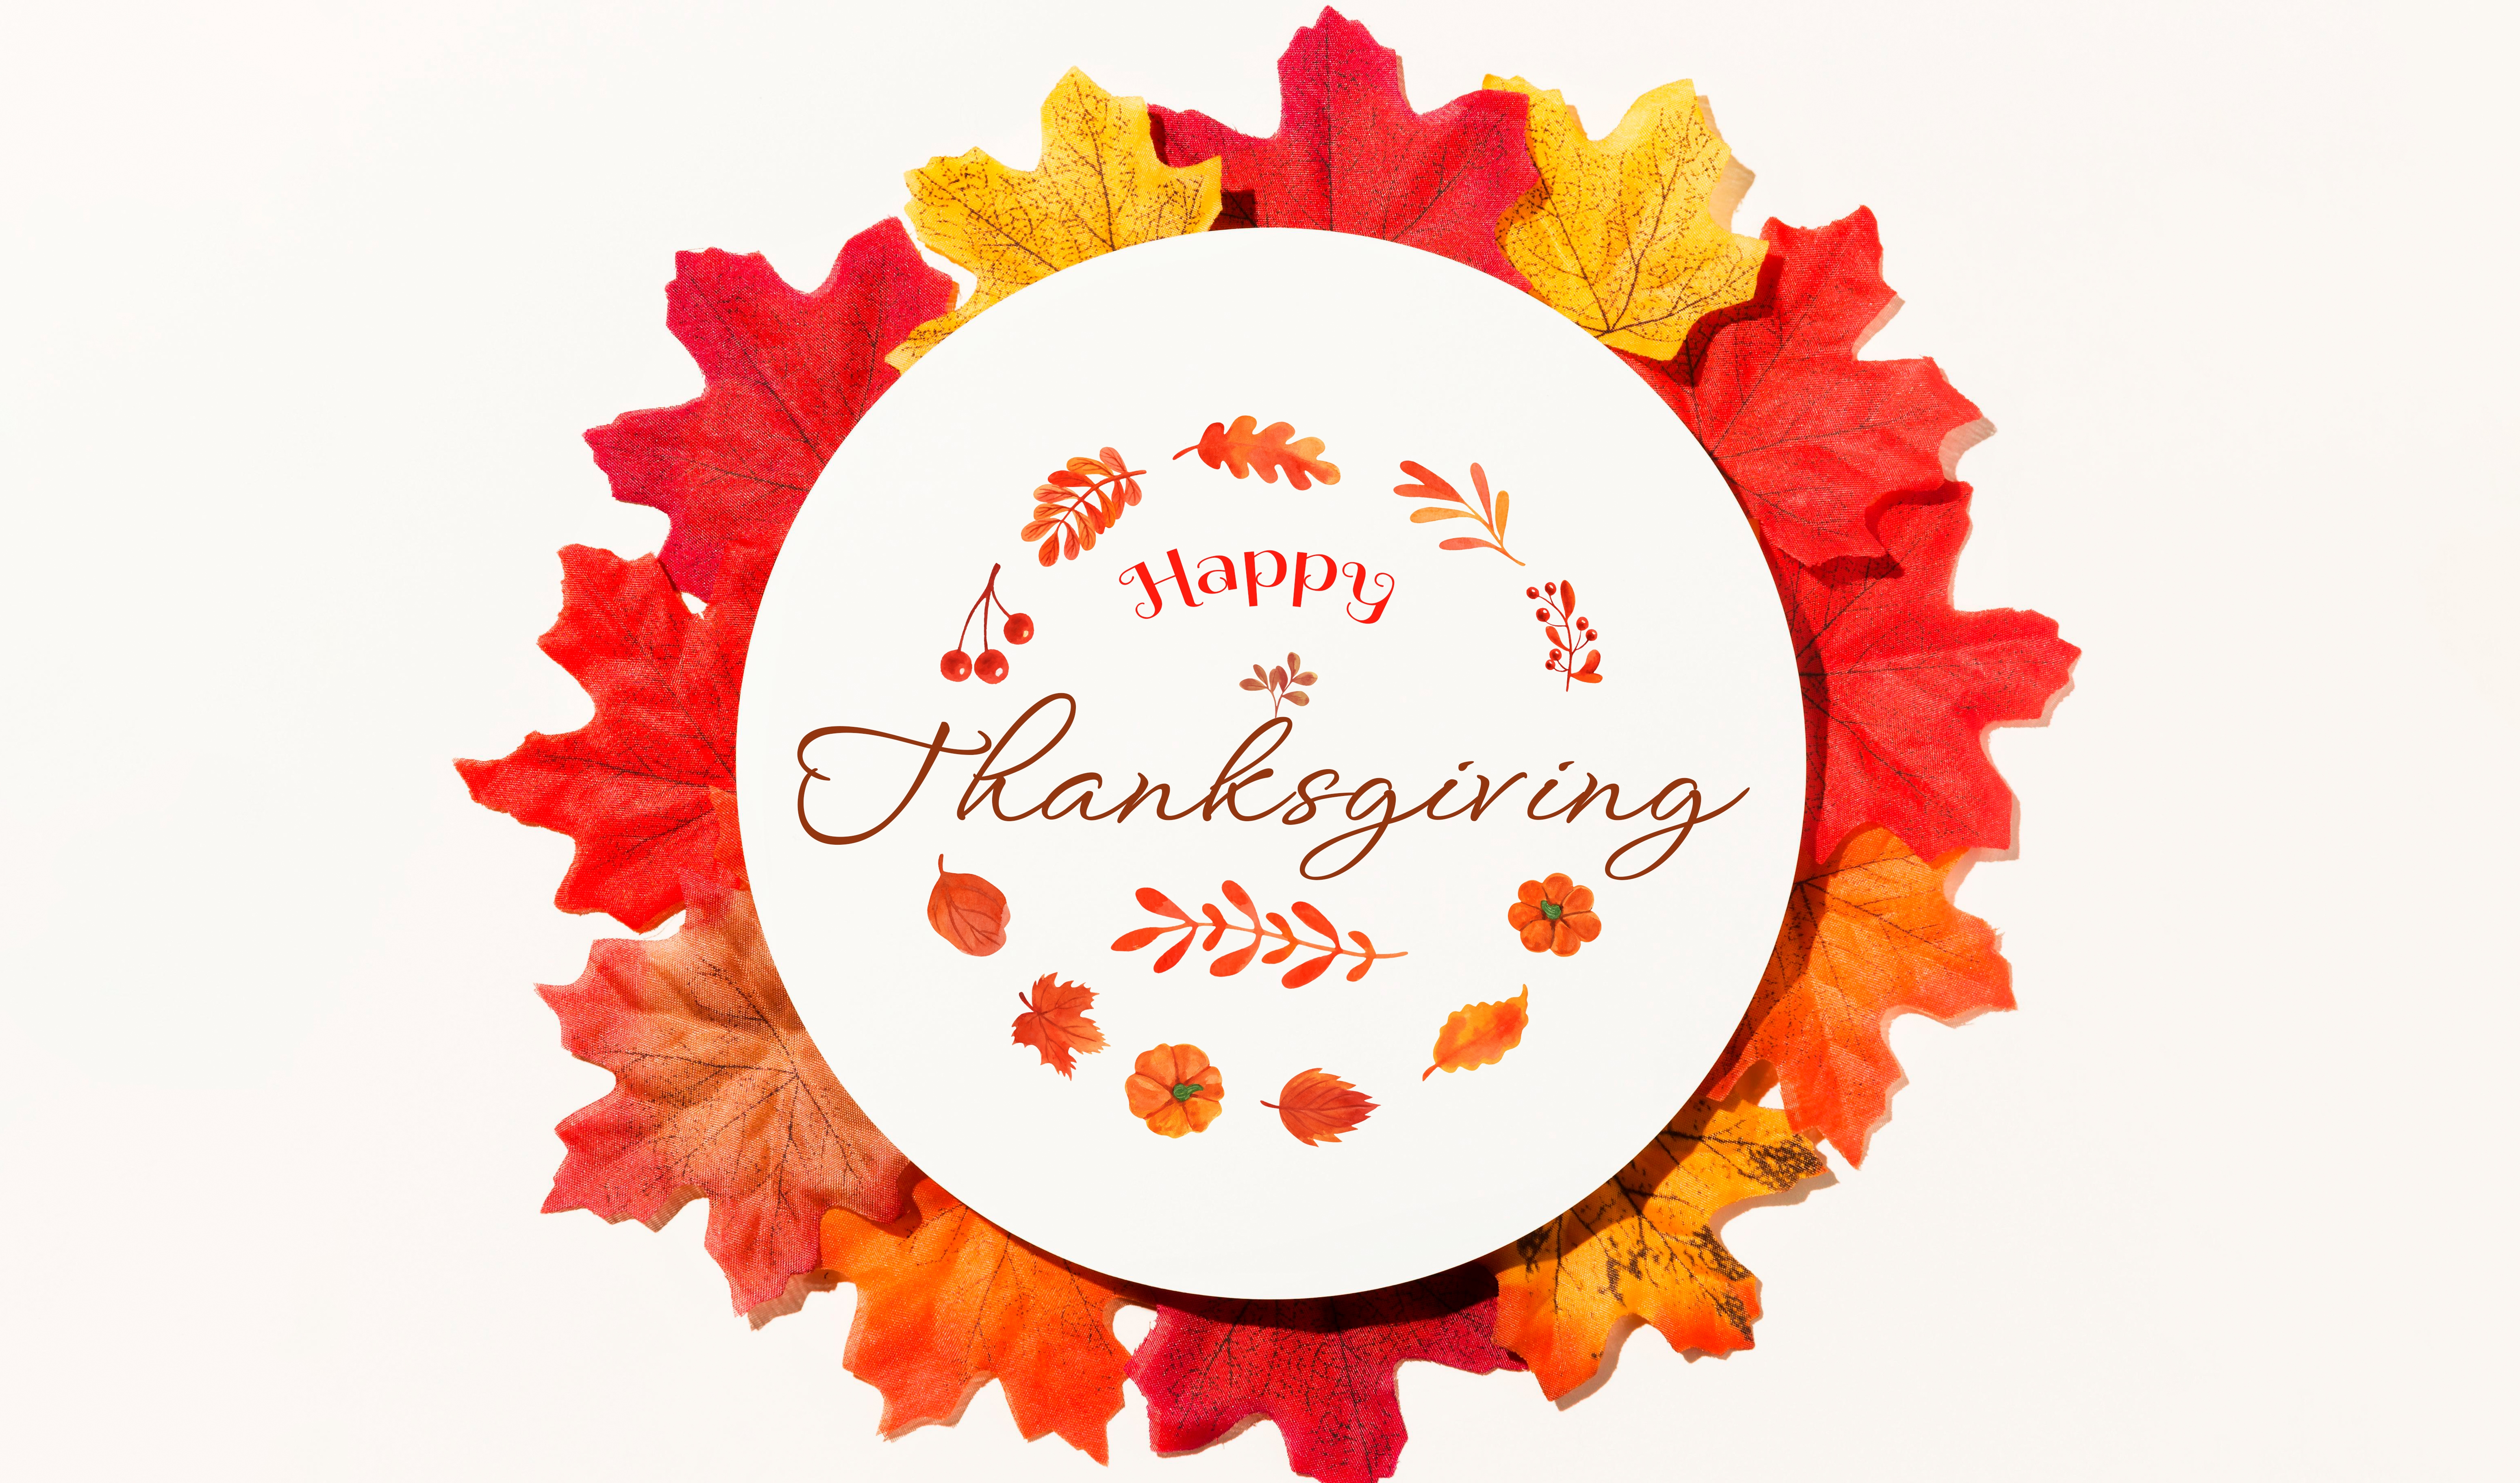 HD wallpaper, White Background, Autumn Leaves, Thanksgiving Day, Fall, Happy Thanksgiving